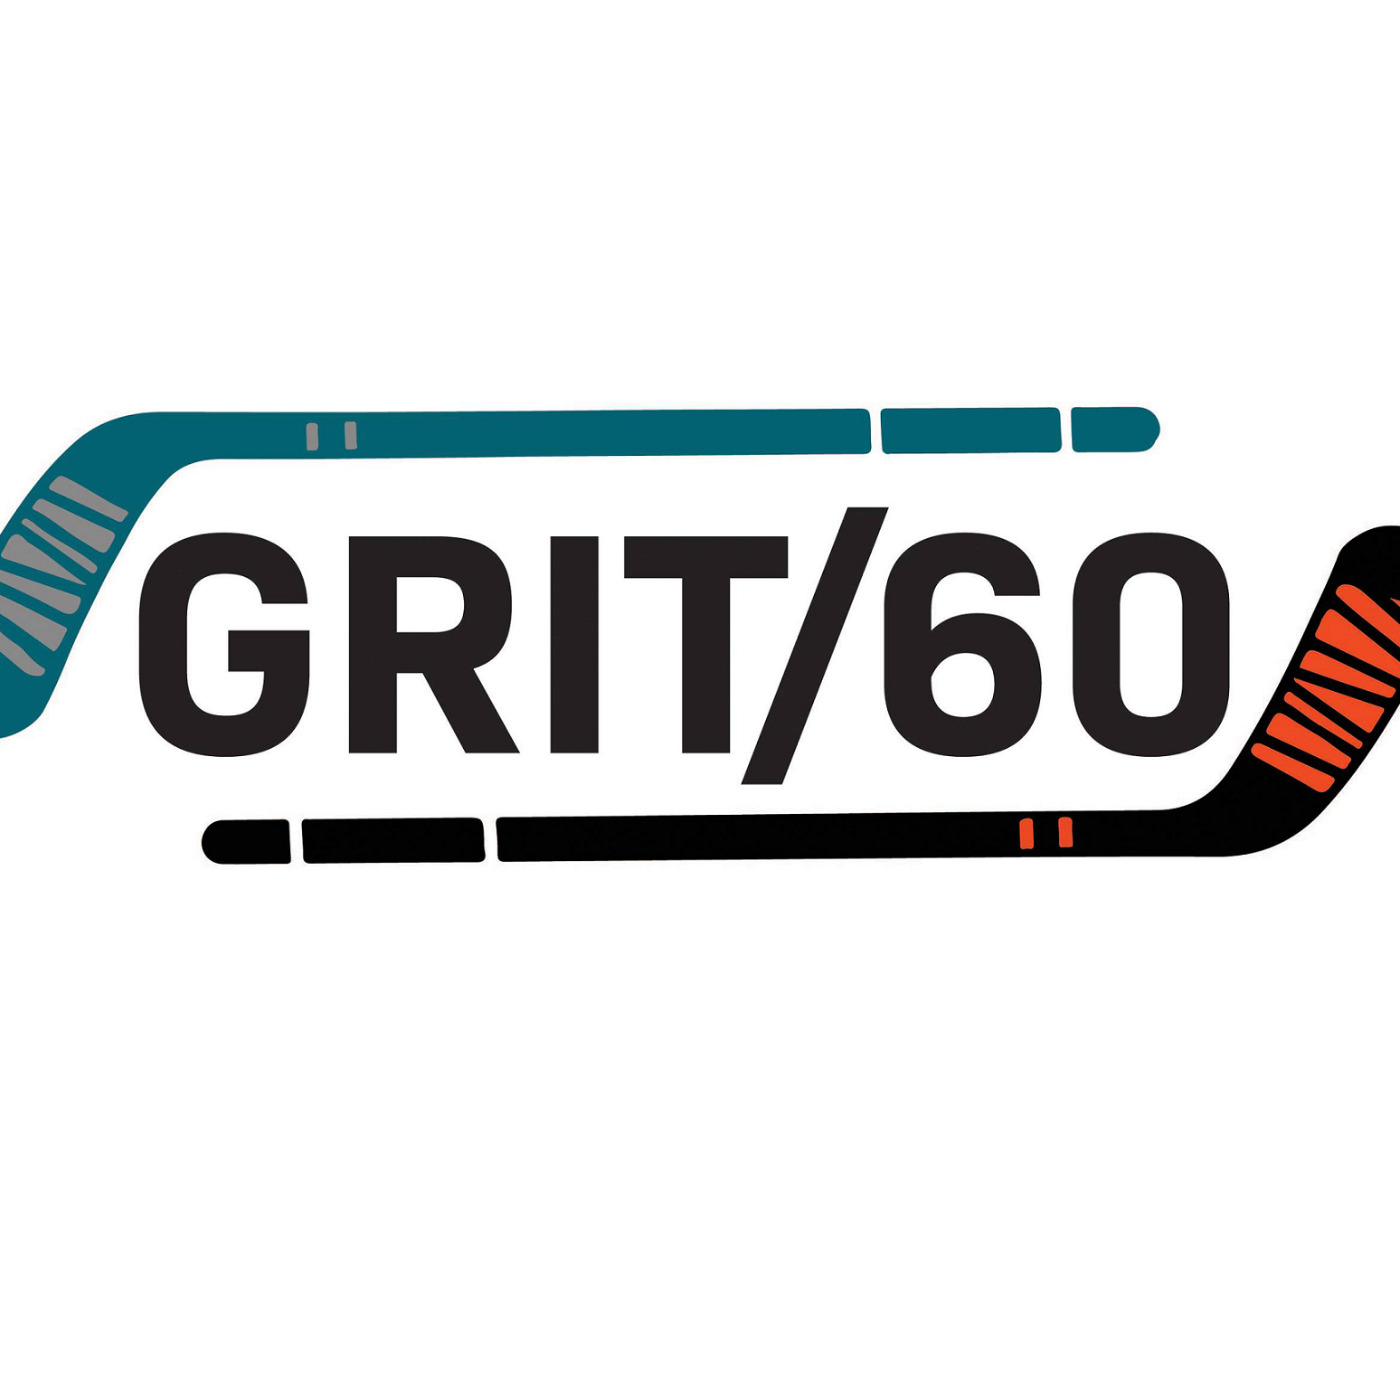 Grit/60 Podcast